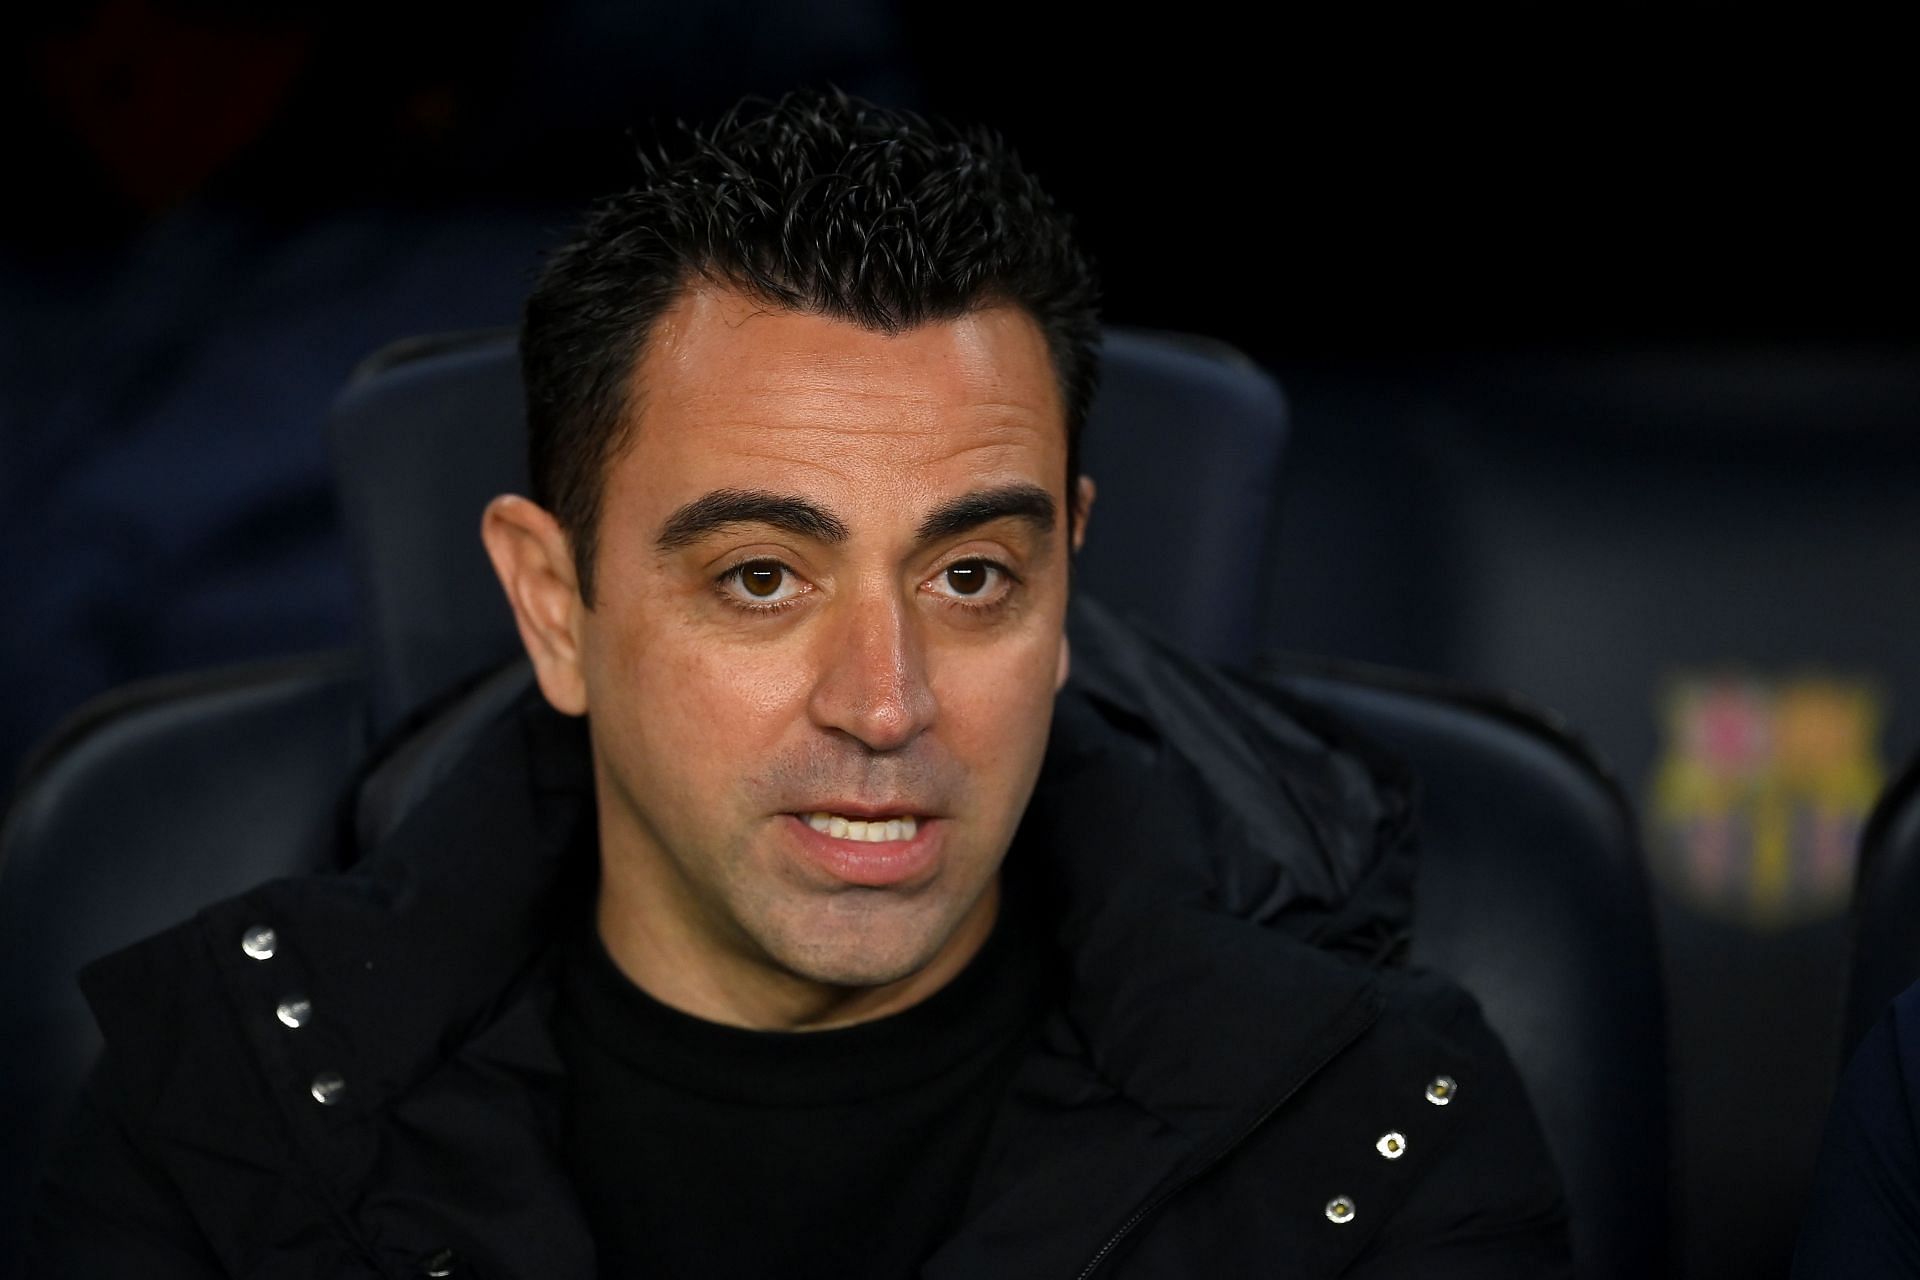 Xavi is in a tough spot right now.